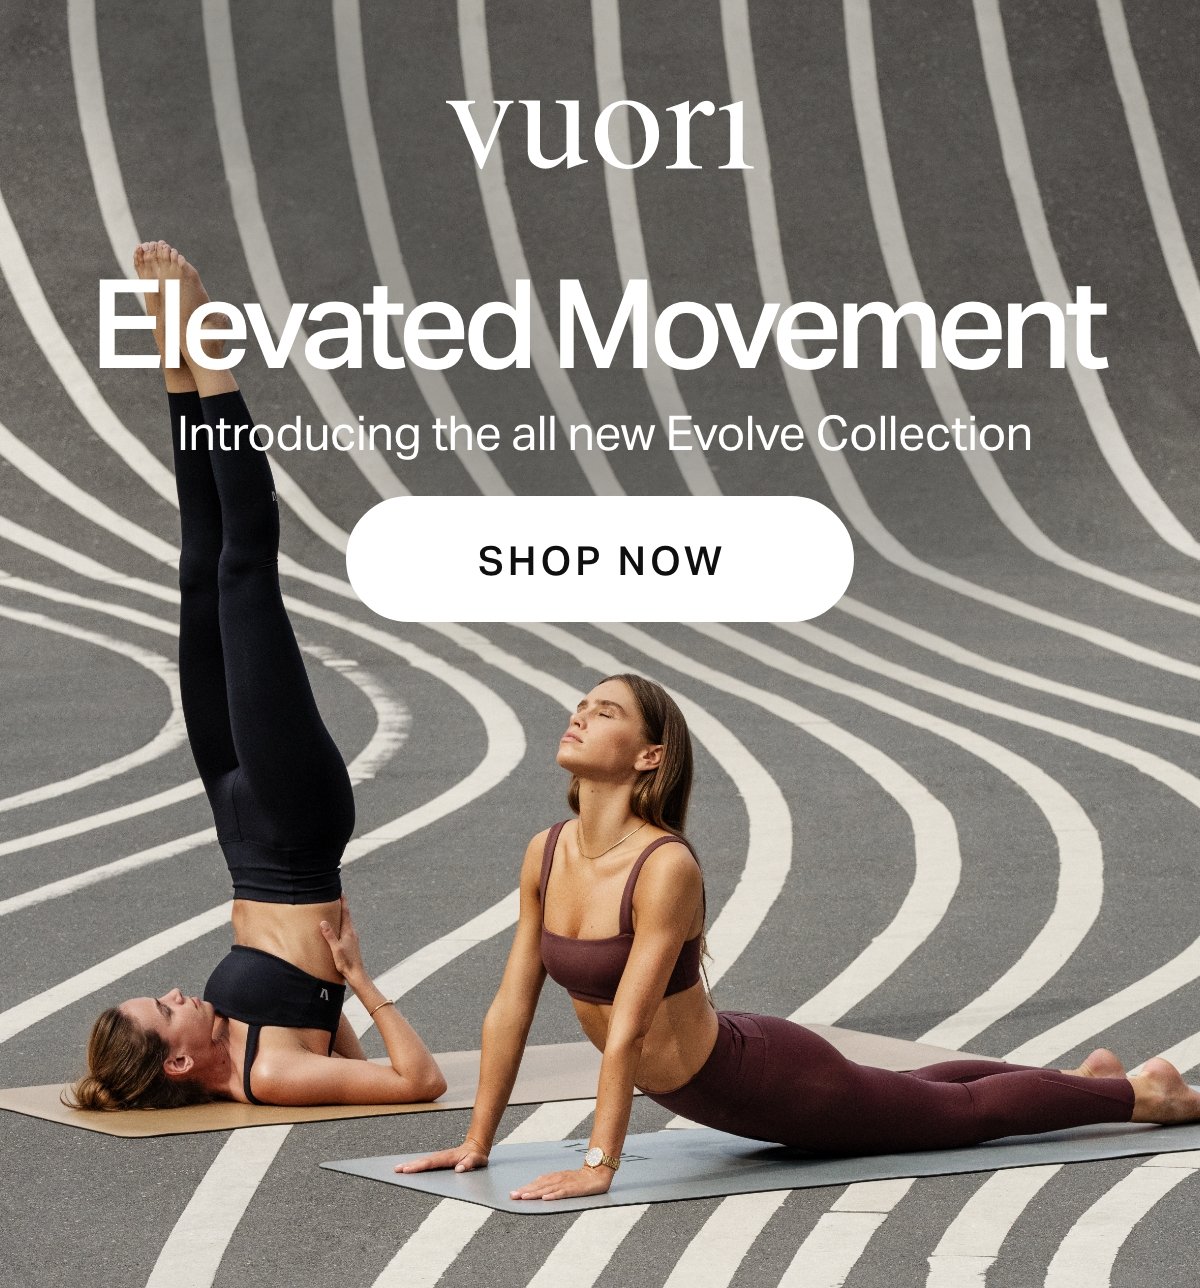 Vuori: Introducing V1 Uplift™ in our new Evolve Legging and Bra